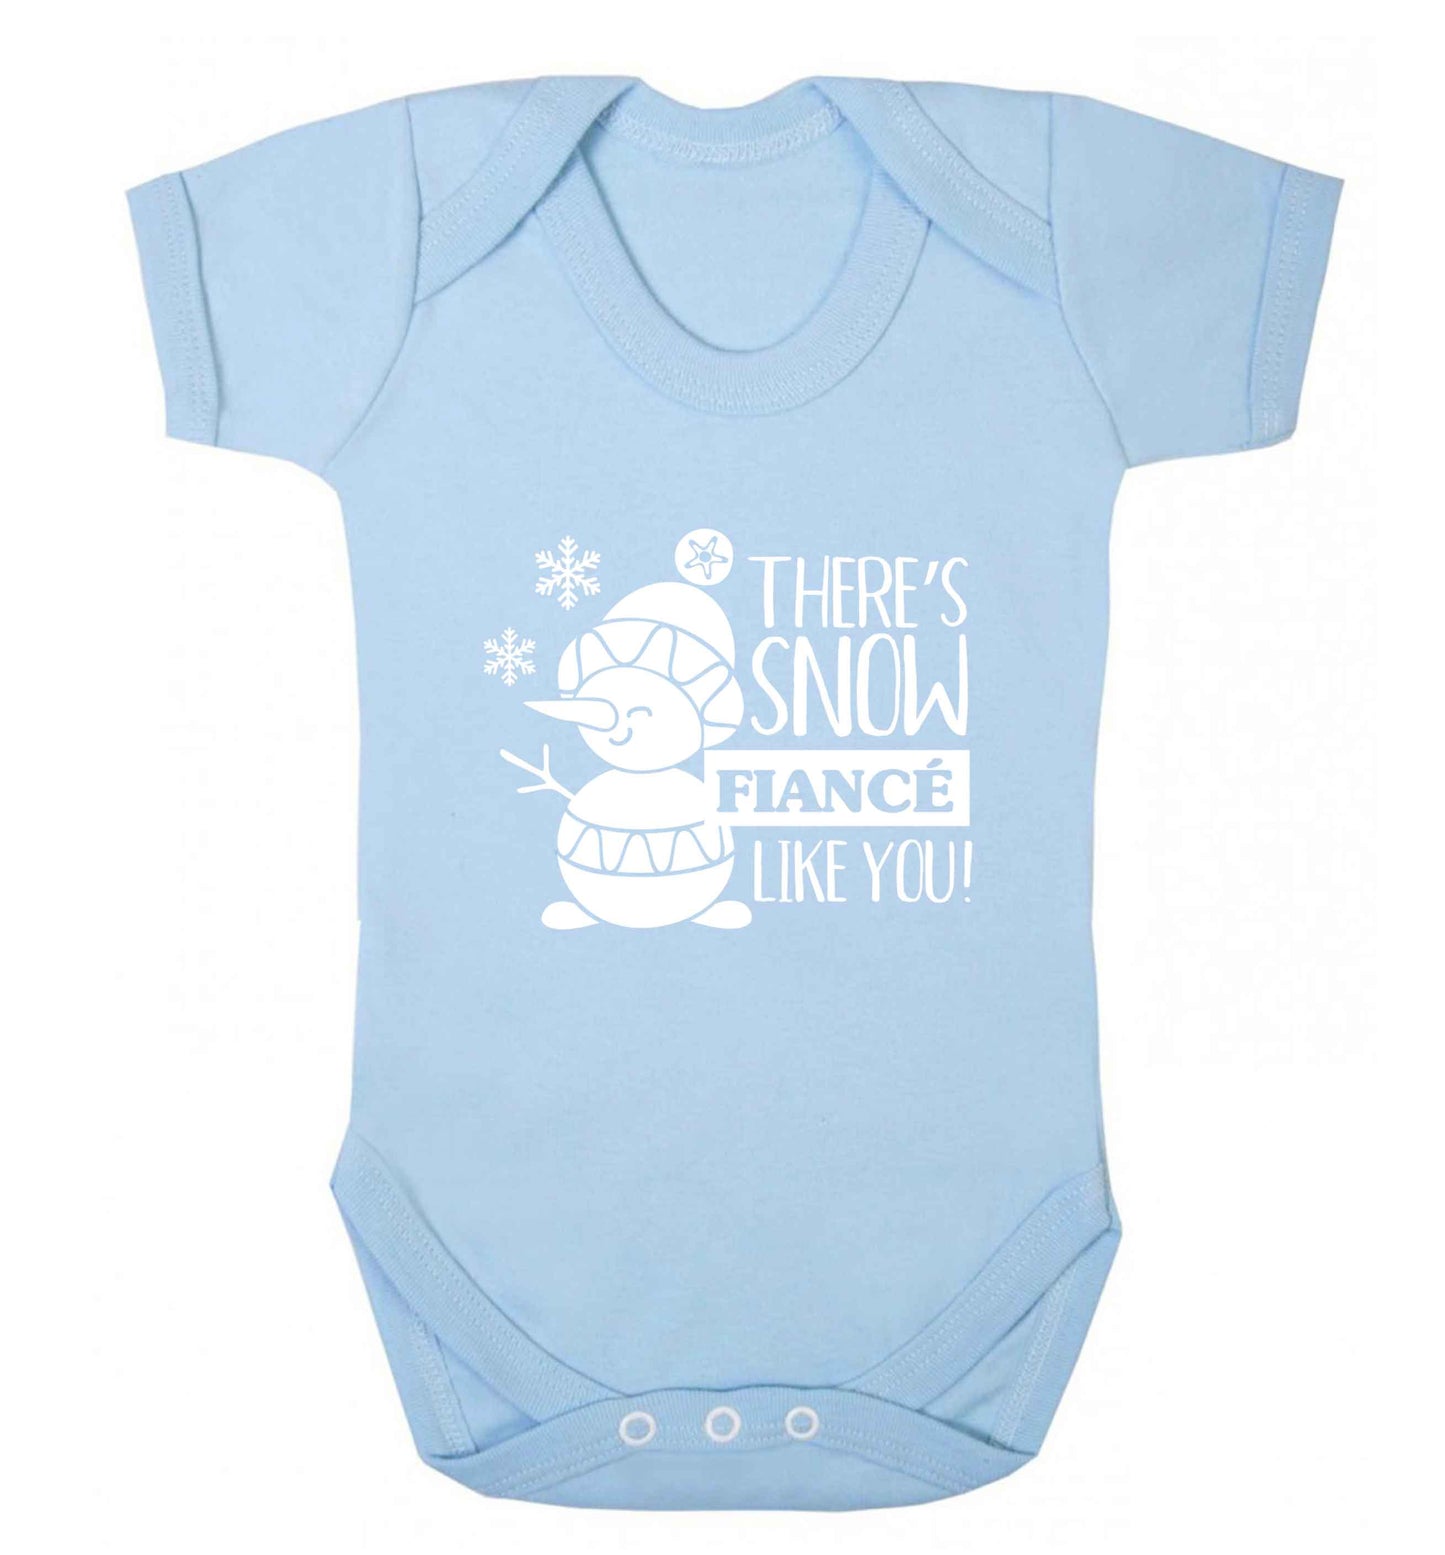 There's snow fiance like you baby vest pale blue 18-24 months